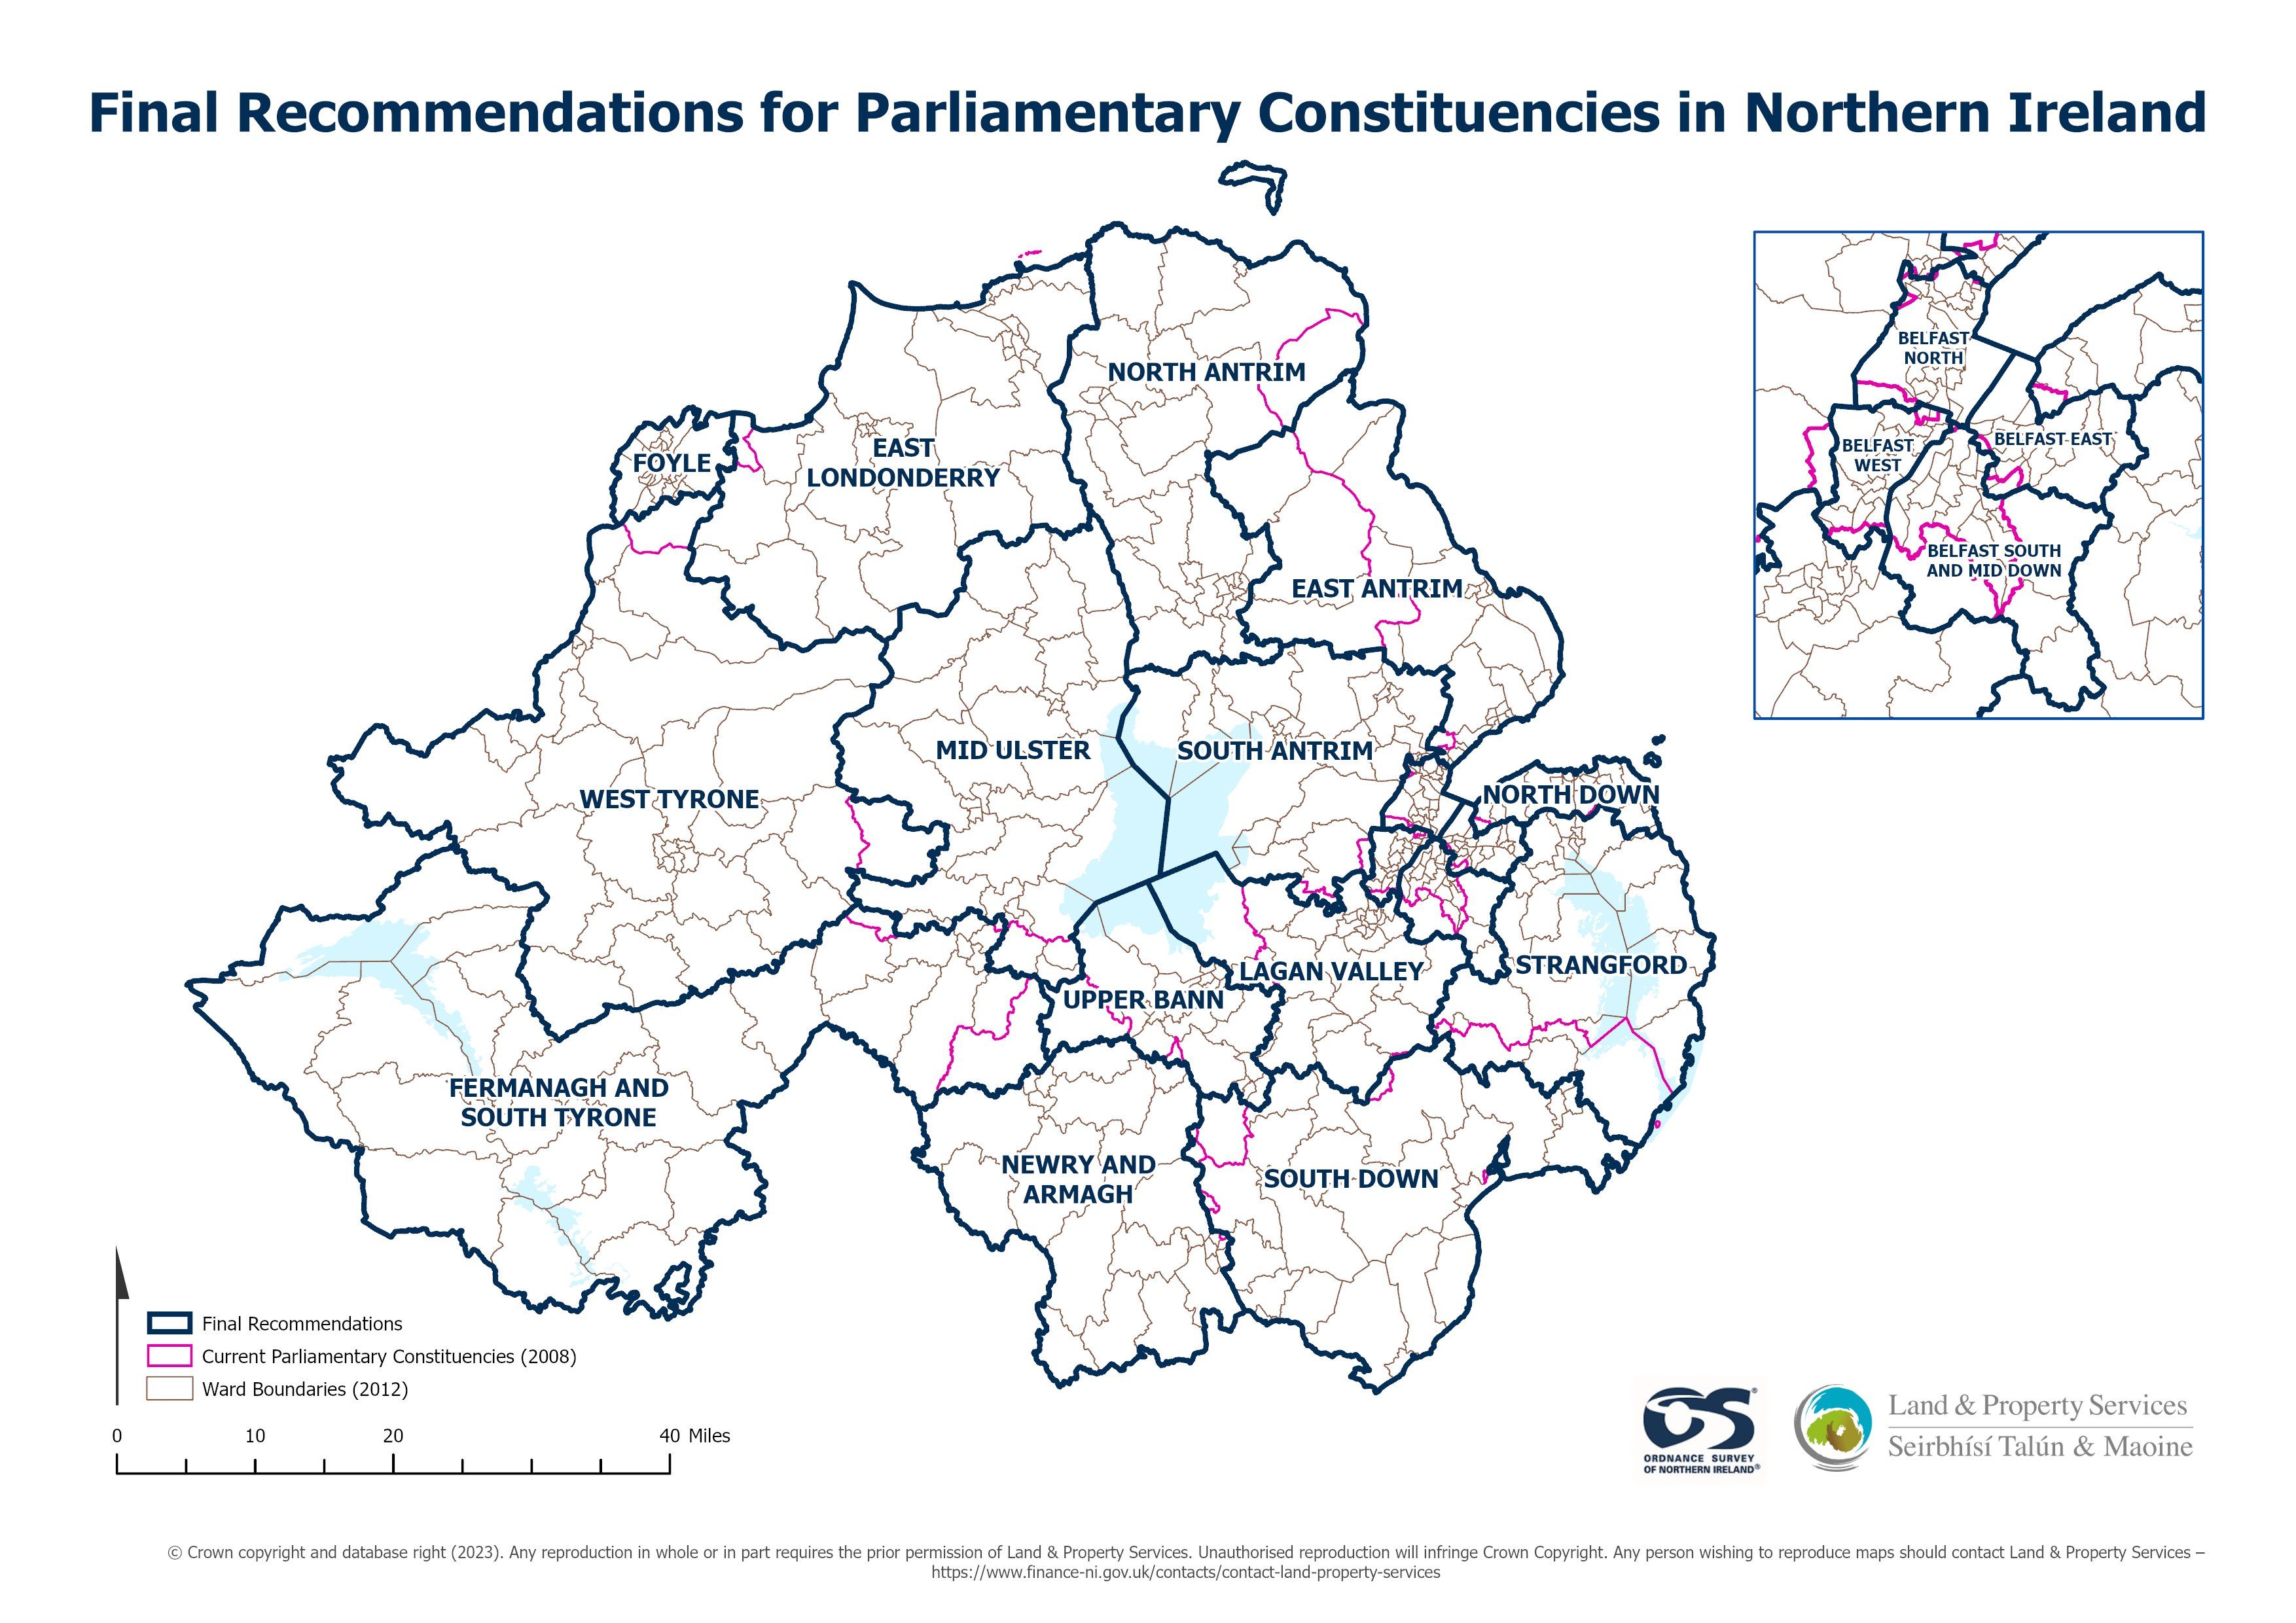 CHANGES: There have been big changes to constituencies in the North, especially to Belfast South which is now Belfast South and Mid Down